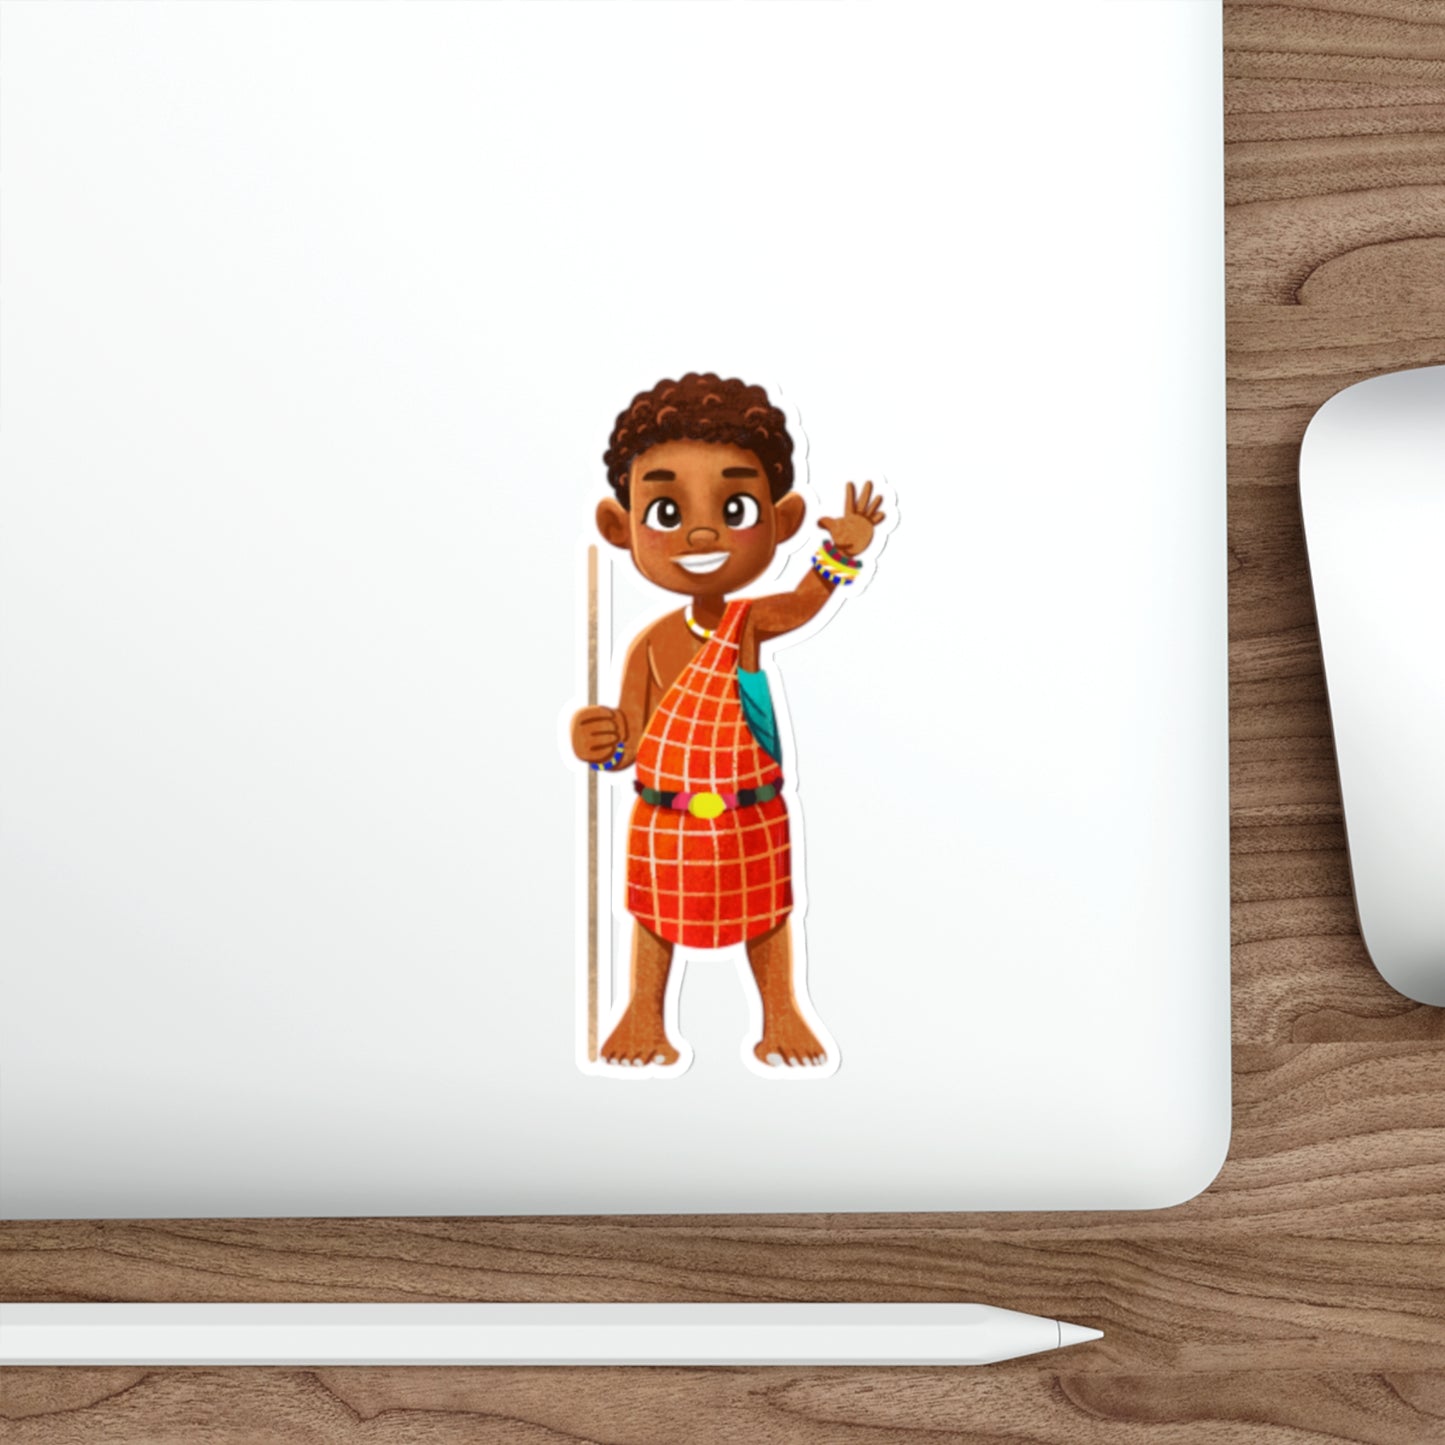 Stickers of Yaro the Maasai Village Boy Waving Goodbye | Die-Cut Elephant Stickers | Outdoor and Indoor Stickers | Water-resistant Stickers